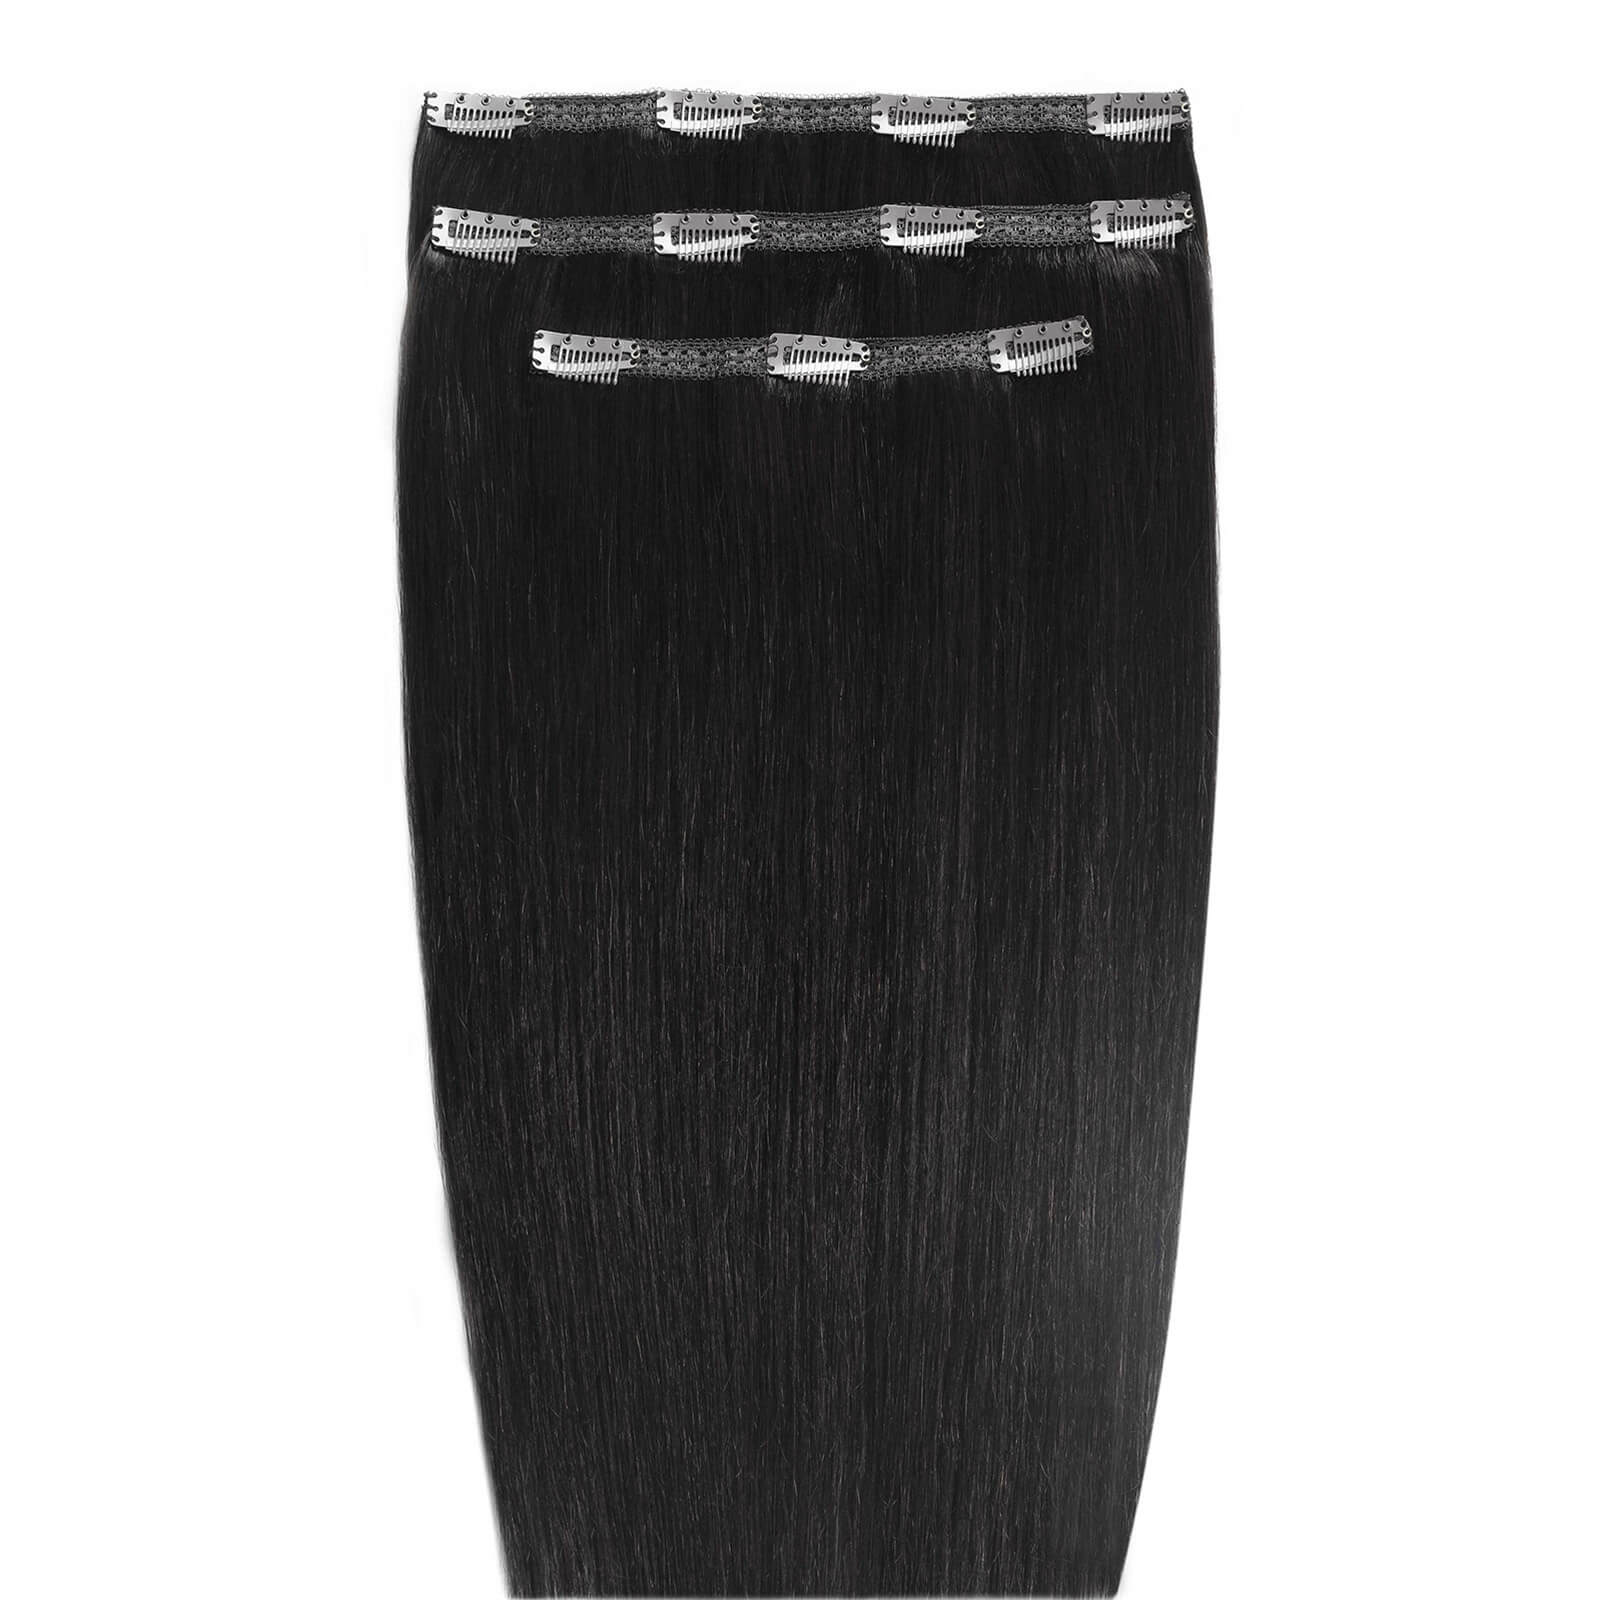 Beauty Works Deluxe Clip-In Hair Extensions 18 Inch (Various Shades) - Jetset Black 1